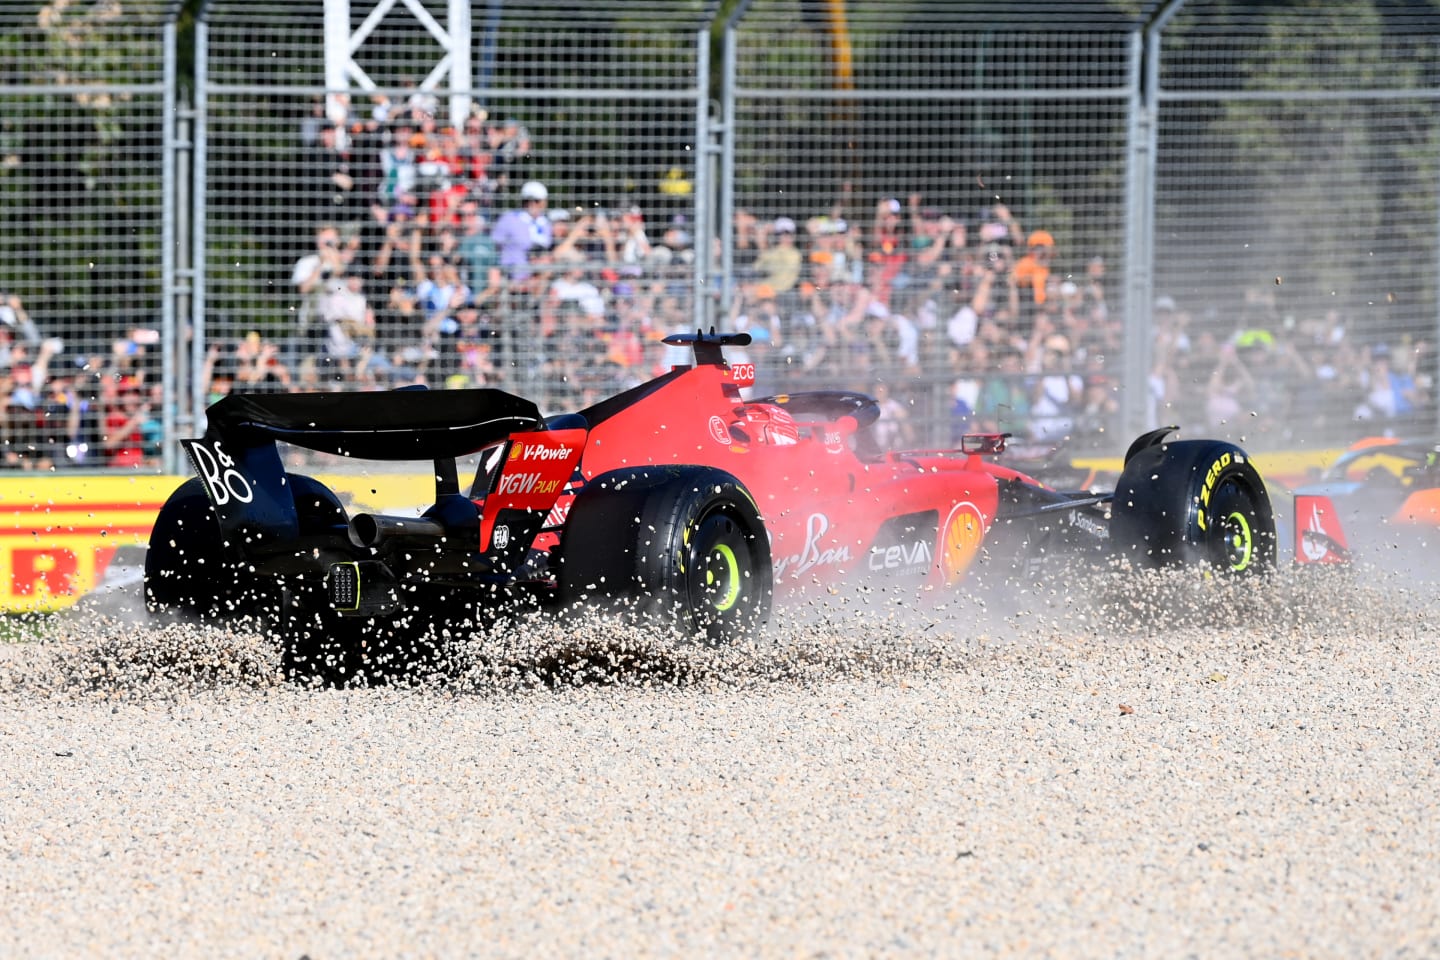 MELBOURNE, AUSTRALIA - APRIL 02: Charles Leclerc of Monaco driving the (16) Ferrari SF-23 gets stuck in a gravel trap during the F1 Grand Prix of Australia at Albert Park Grand Prix Circuit on April 02, 2023 in Melbourne, Australia. (Photo by Quinn Rooney/Getty Images)